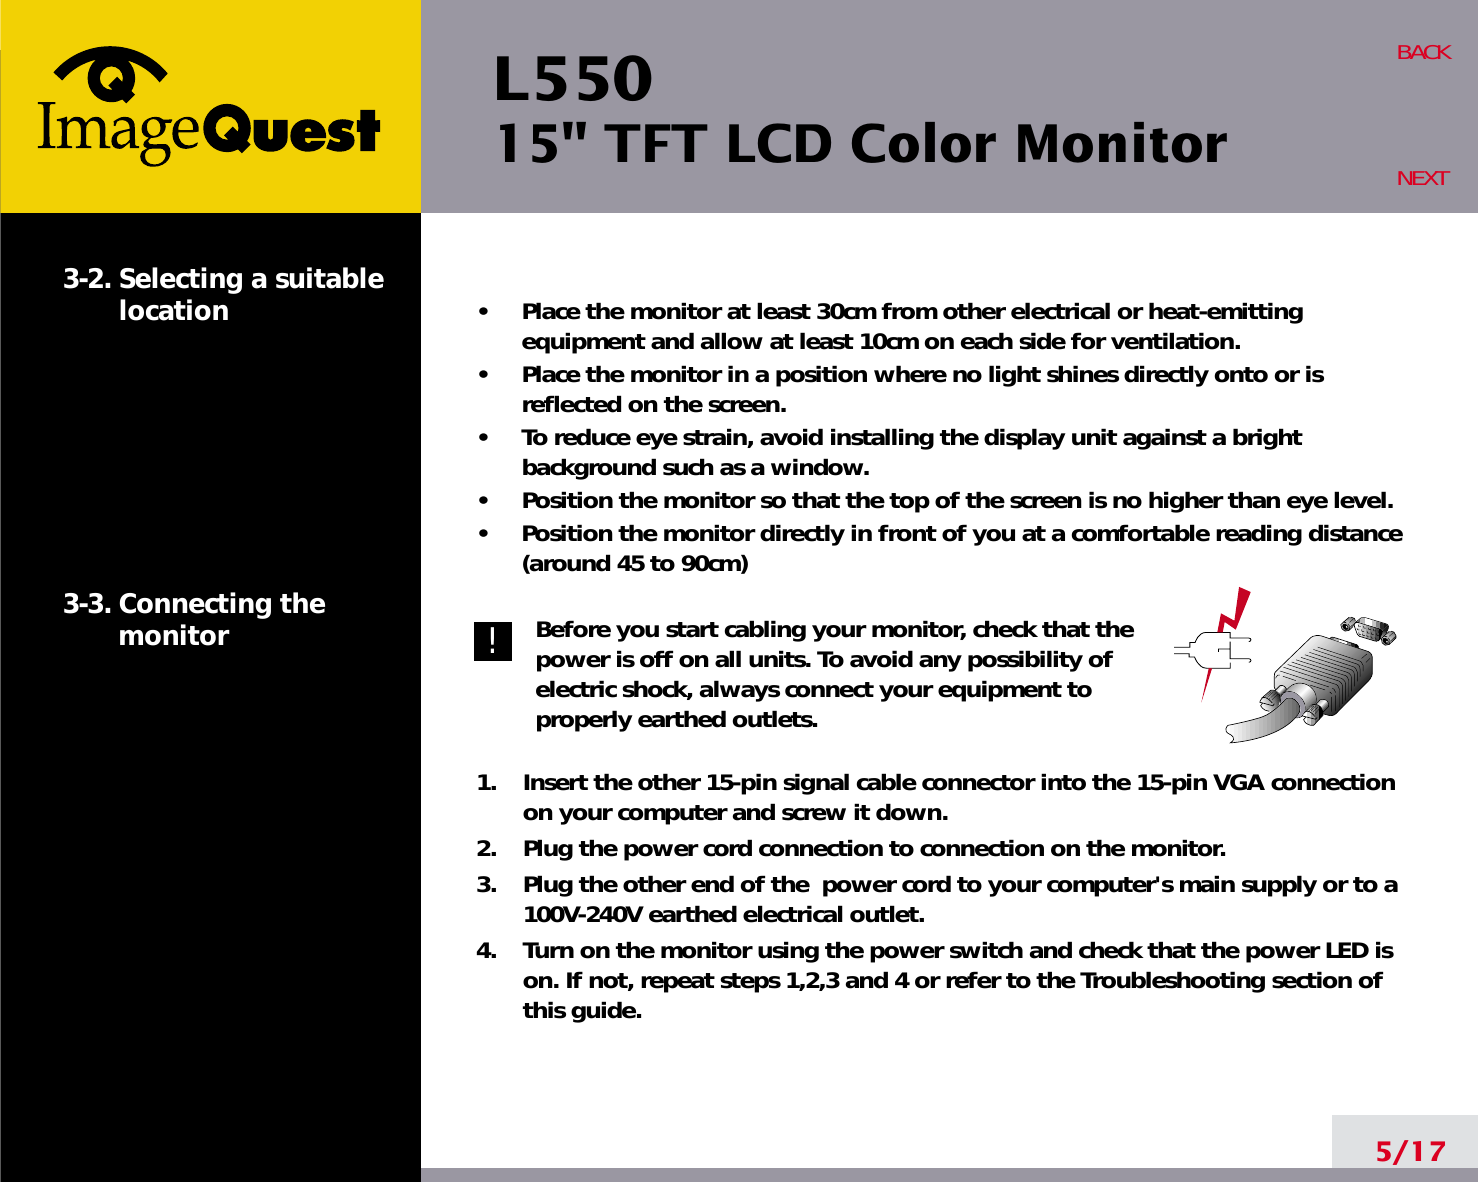 L550 15&quot; TFT LCD Color Monitor5/17BACKNEXT3-2. Selecting a suitablelocation3-3. Connecting the monitor•     Place the monitor at least 30cm from other electrical or heat-emittingequipment and allow at least 10cm on each side for ventilation.•     Place the monitor in a position where no light shines directly onto or isreflected on the screen.•     To reduce eye strain, avoid installing the display unit against a brightbackground such as a window.•     Position the monitor so that the top of the screen is no higher than eye level.•     Position the monitor directly in front of you at a comfortable reading distance(around 45 to 90cm) Before you start cabling your monitor, check that thepower is off on all units. To avoid any possibility ofelectric shock, always connect your equipment toproperly earthed outlets.1.    Insert the other 15-pin signal cable connector into the 15-pin VGA connectionon your computer and screw it down. 2.    Plug the power cord connection to connection on the monitor.3.    Plug the other end of the  power cord to your computer&apos;s main supply or to a100V-240V earthed electrical outlet.4.    Turn on the monitor using the power switch and check that the power LED ison. If not, repeat steps 1,2,3 and 4 or refer to the Troubleshooting section ofthis guide.!!